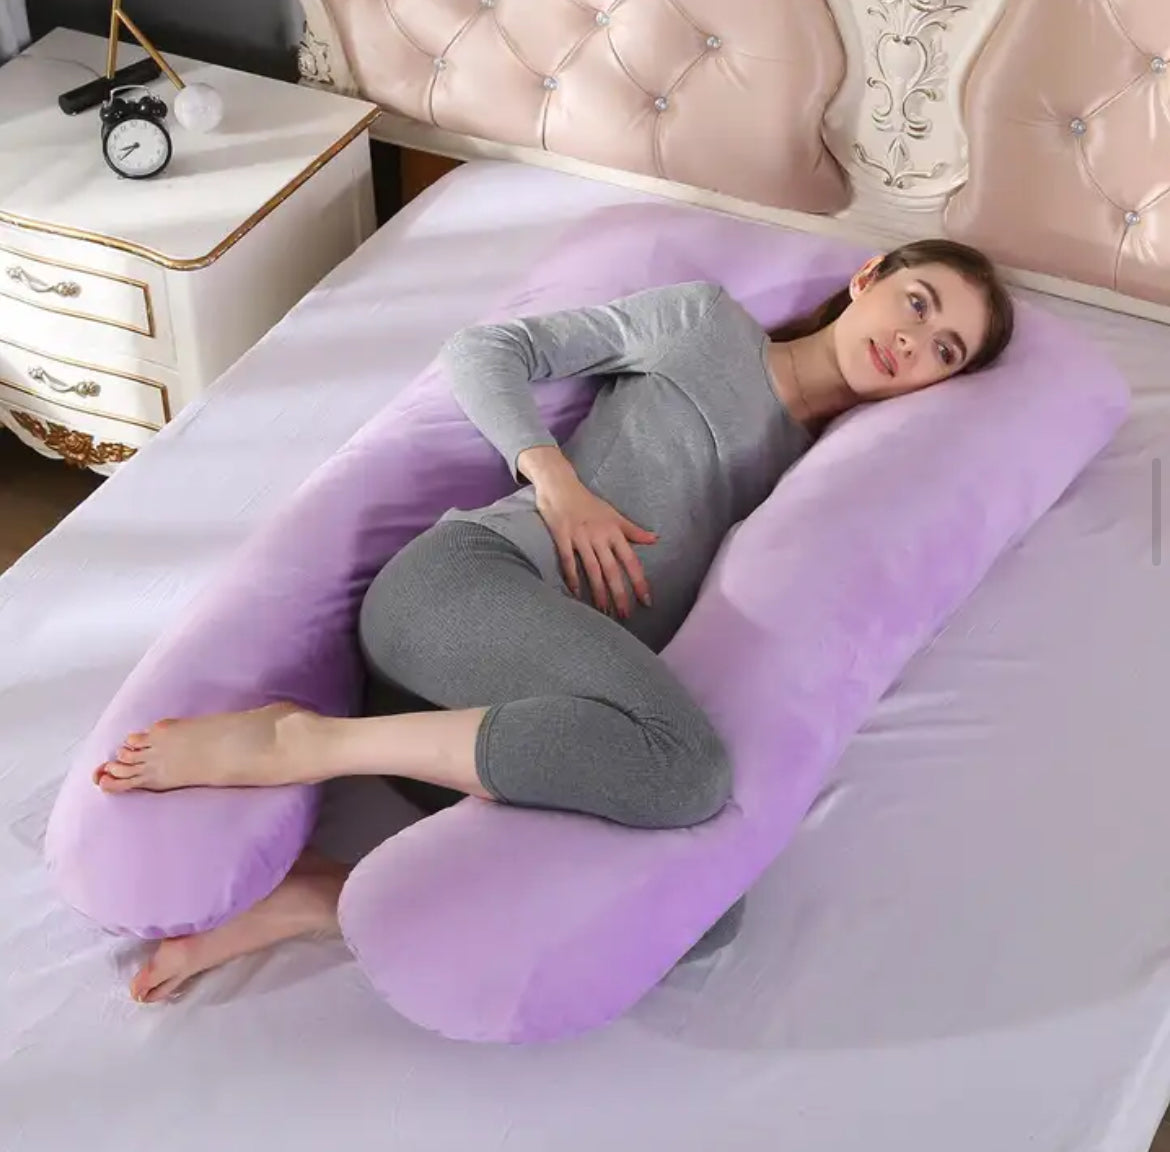 100% Cotton Full Body Pillow,  U Shape Pregnancy Pillow Sleeping Support, Baby 🌟🌙 Bumps Collection